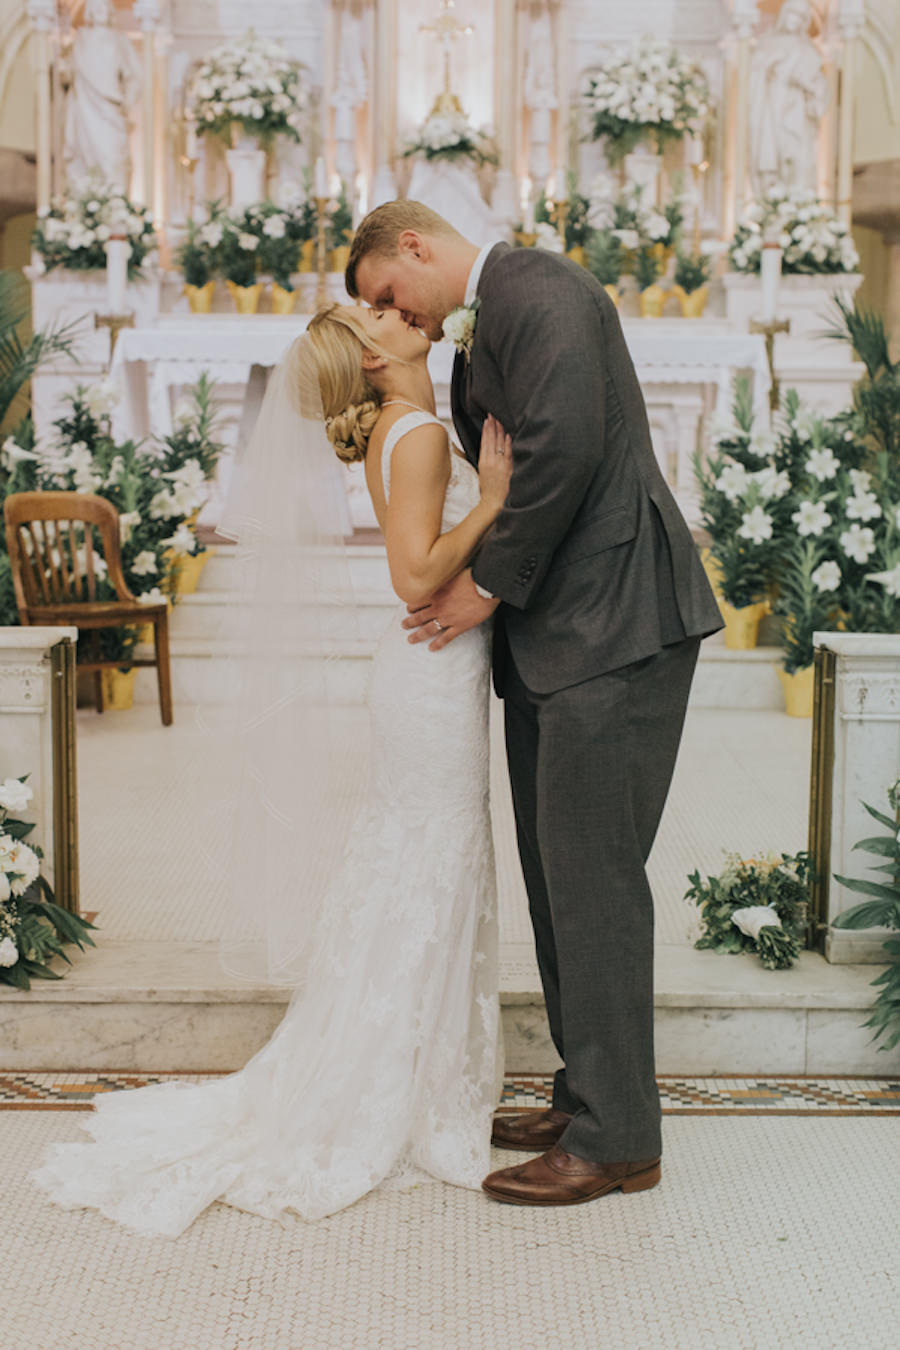 Bride and Groom Kissing at Altar at Wedding Ceremony | Historic Downtown Tampa Wedding Venue Sacred Heart Catholic Church | Cleveland Browns Football Player Charley Hughlett Wedding